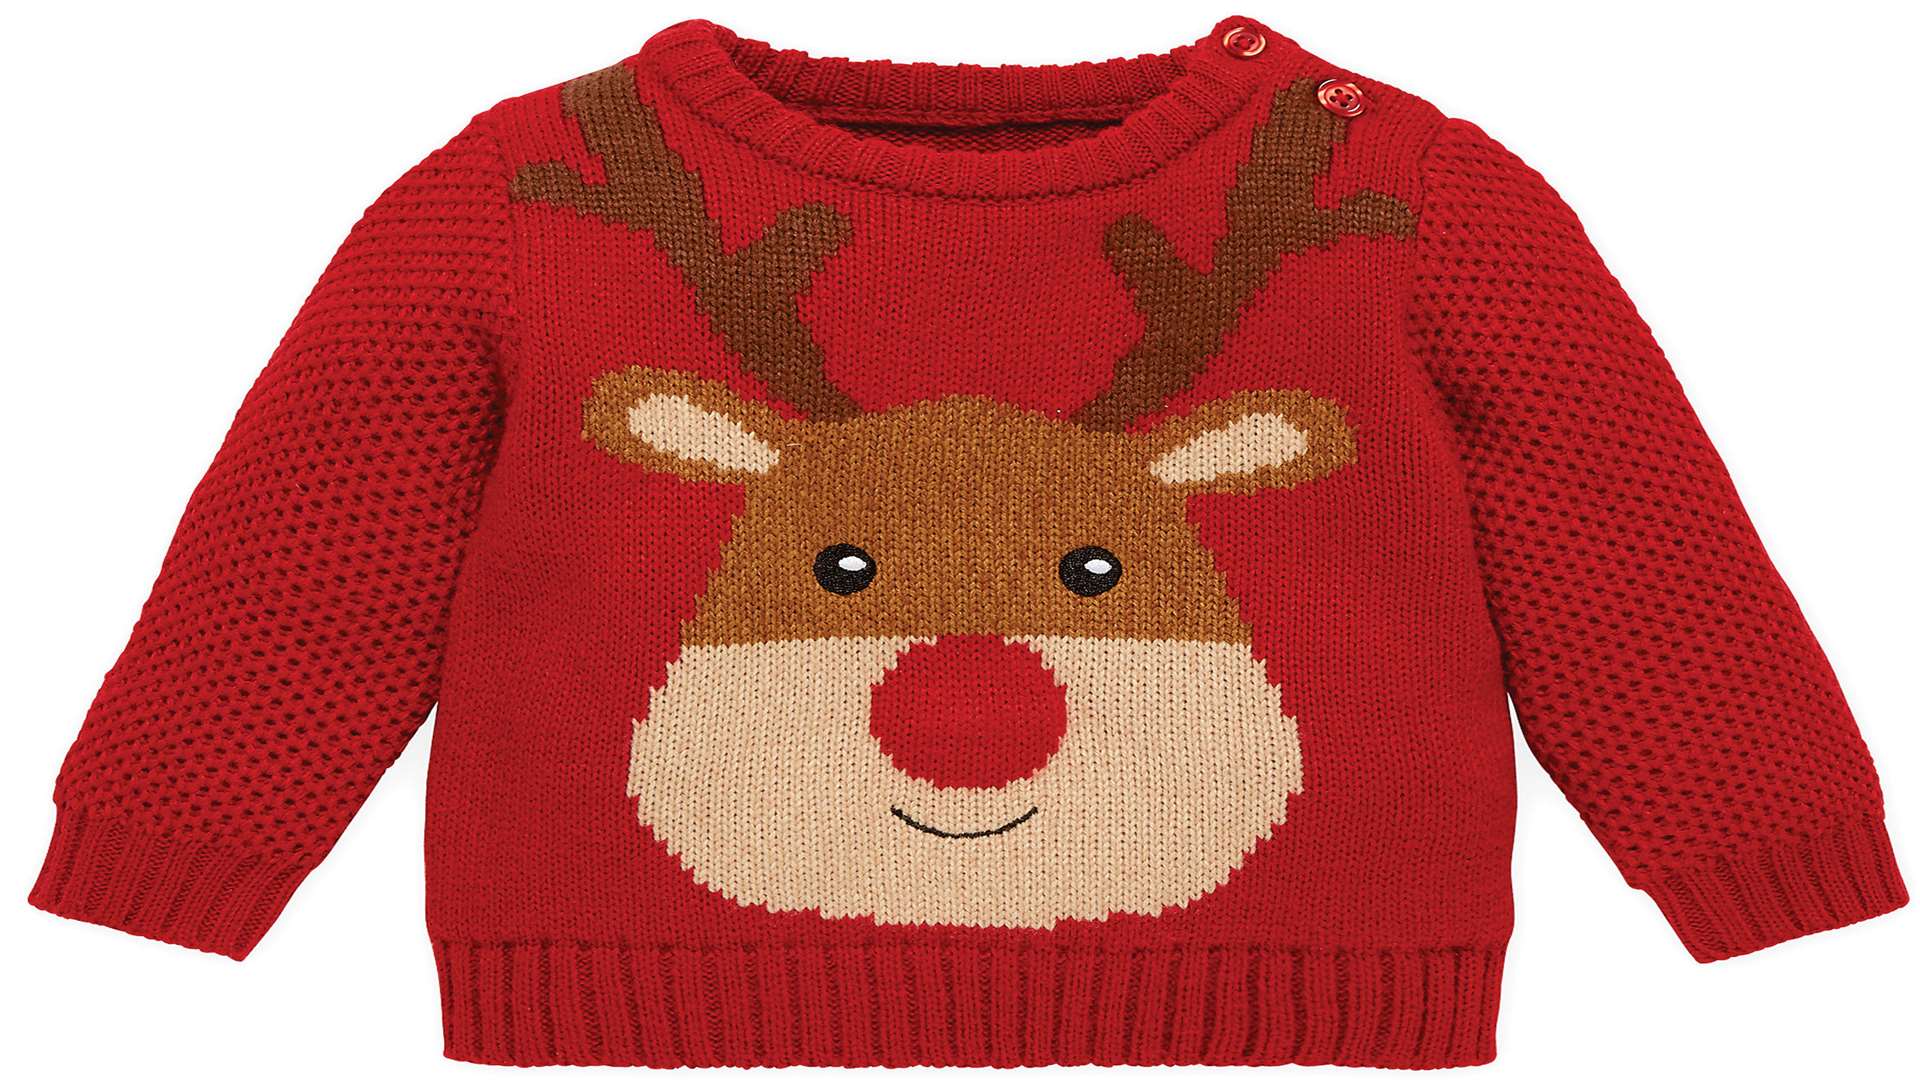 Christmas reindeer jumper: Made from a super-soft, stretchy fabric, this jumper features a large reindeer with a red nose which flashes when pushed. Available in sizes from 18 months to three years. From £12, www.mothercare.com